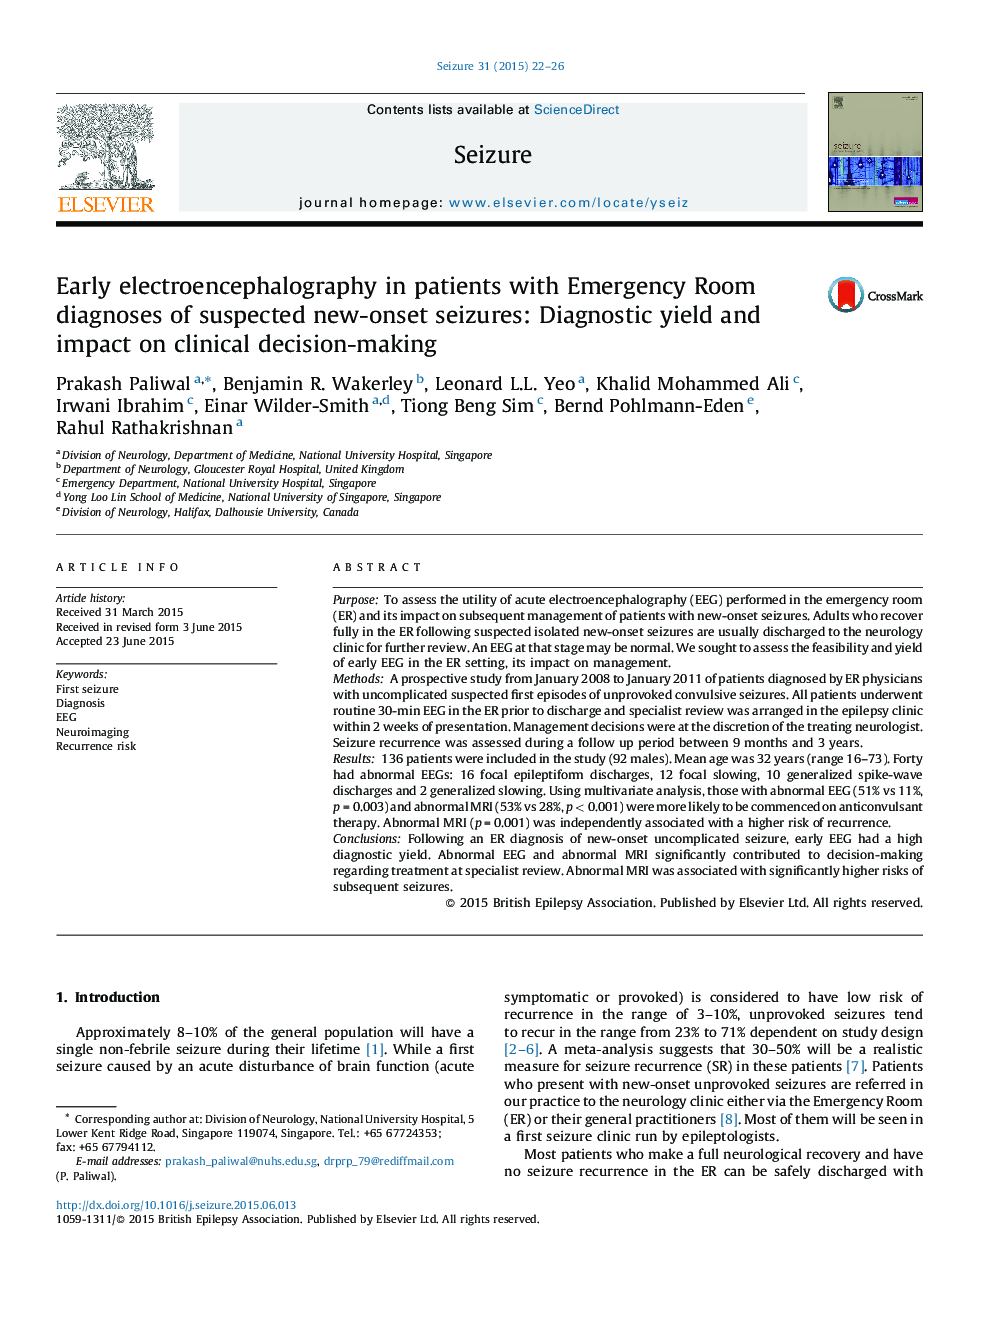 Early electroencephalography in patients with Emergency Room diagnoses of suspected new-onset seizures: Diagnostic yield and impact on clinical decision-making